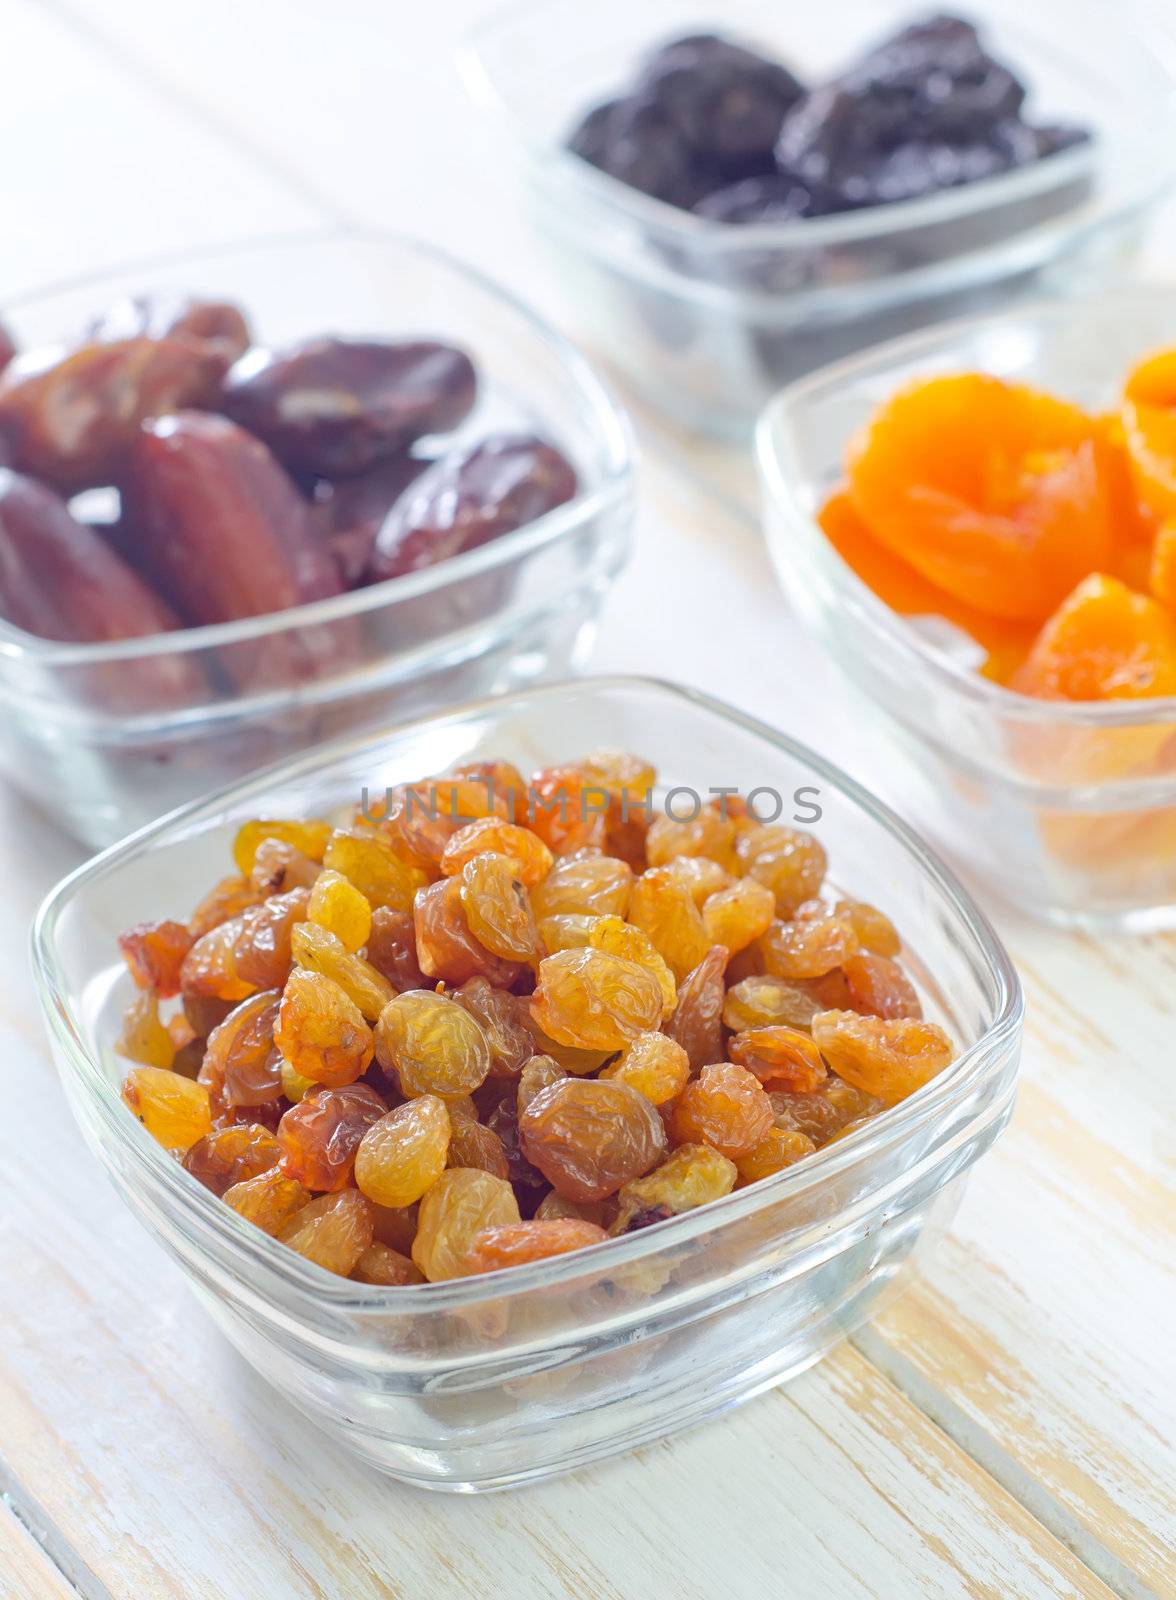 dried apricots, raisins and dates